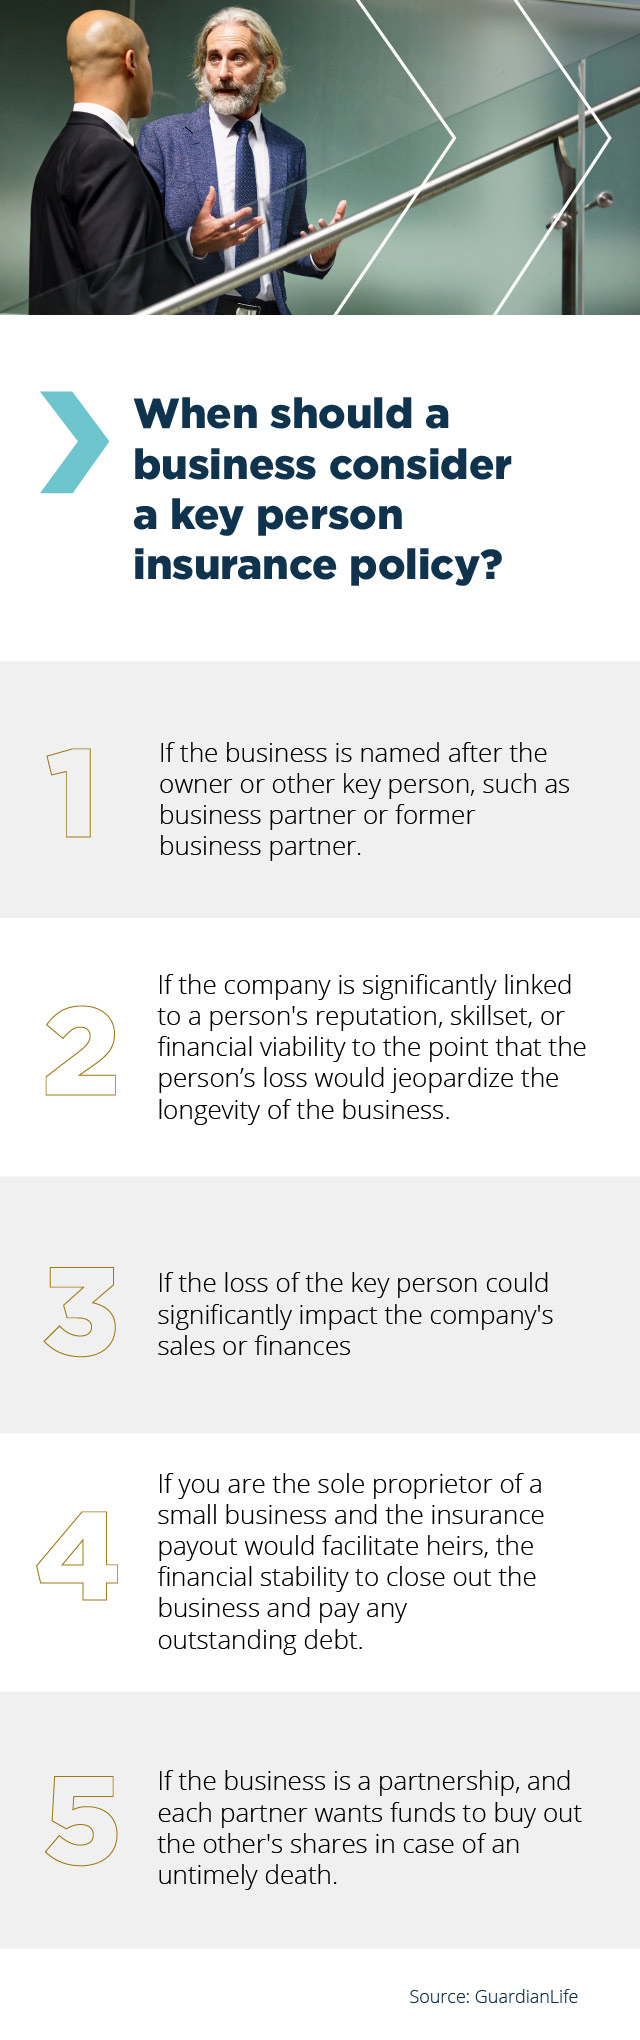 When a business should consider a key person insurance plan